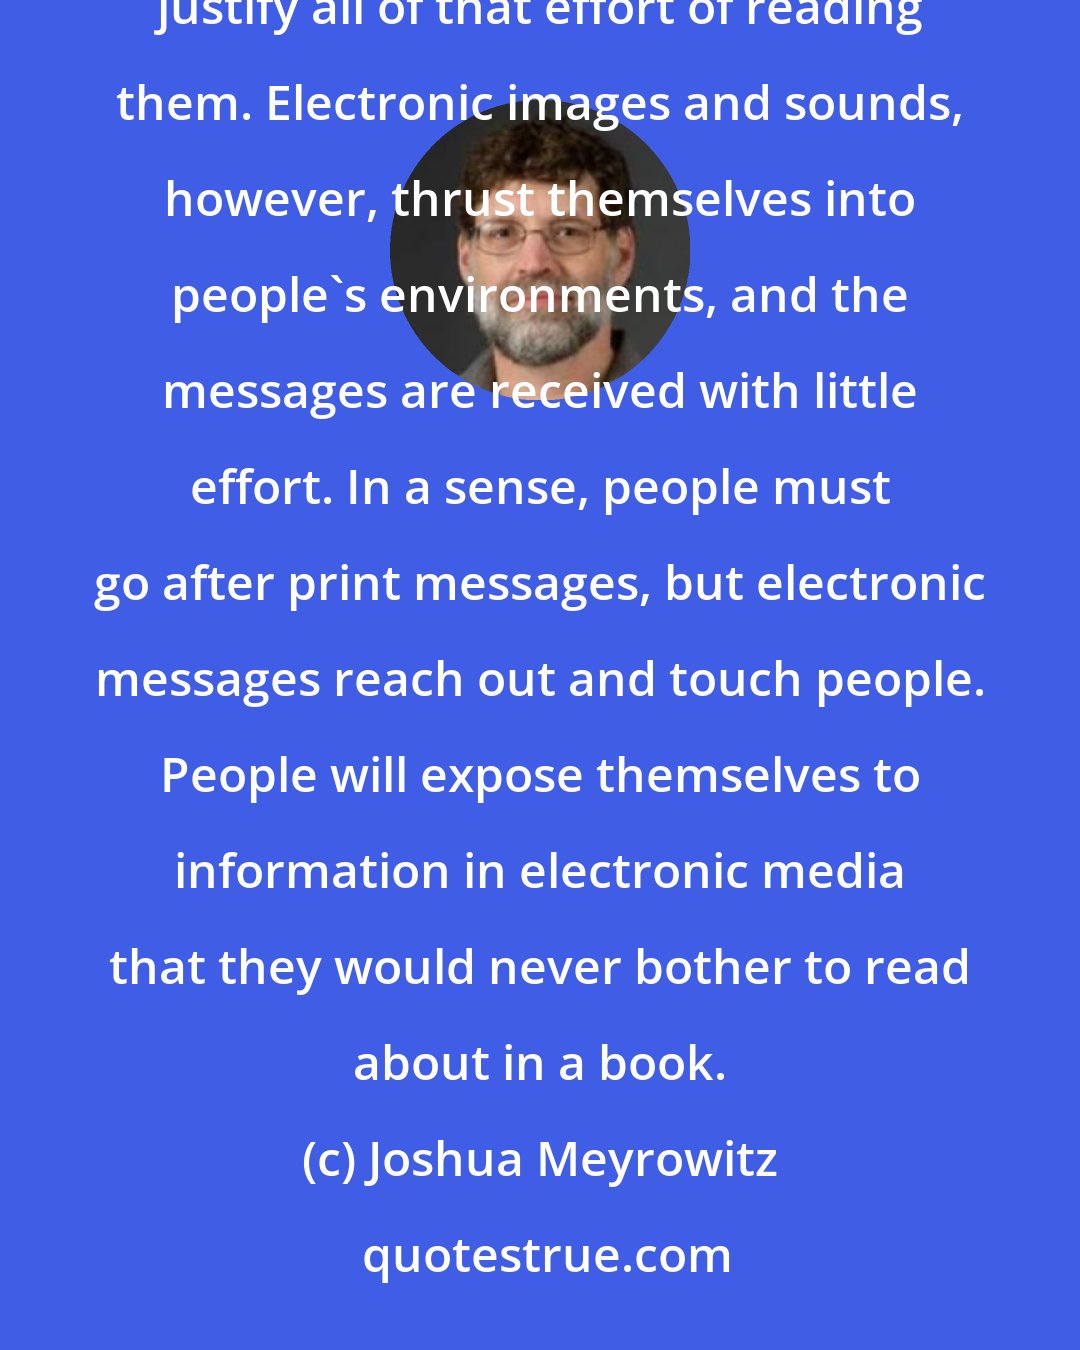 Joshua Meyrowitz: People are more likely to search for specific books in which they are actively interested and that justify all of that effort of reading them. Electronic images and sounds, however, thrust themselves into people's environments, and the messages are received with little effort. In a sense, people must go after print messages, but electronic messages reach out and touch people. People will expose themselves to information in electronic media that they would never bother to read about in a book.